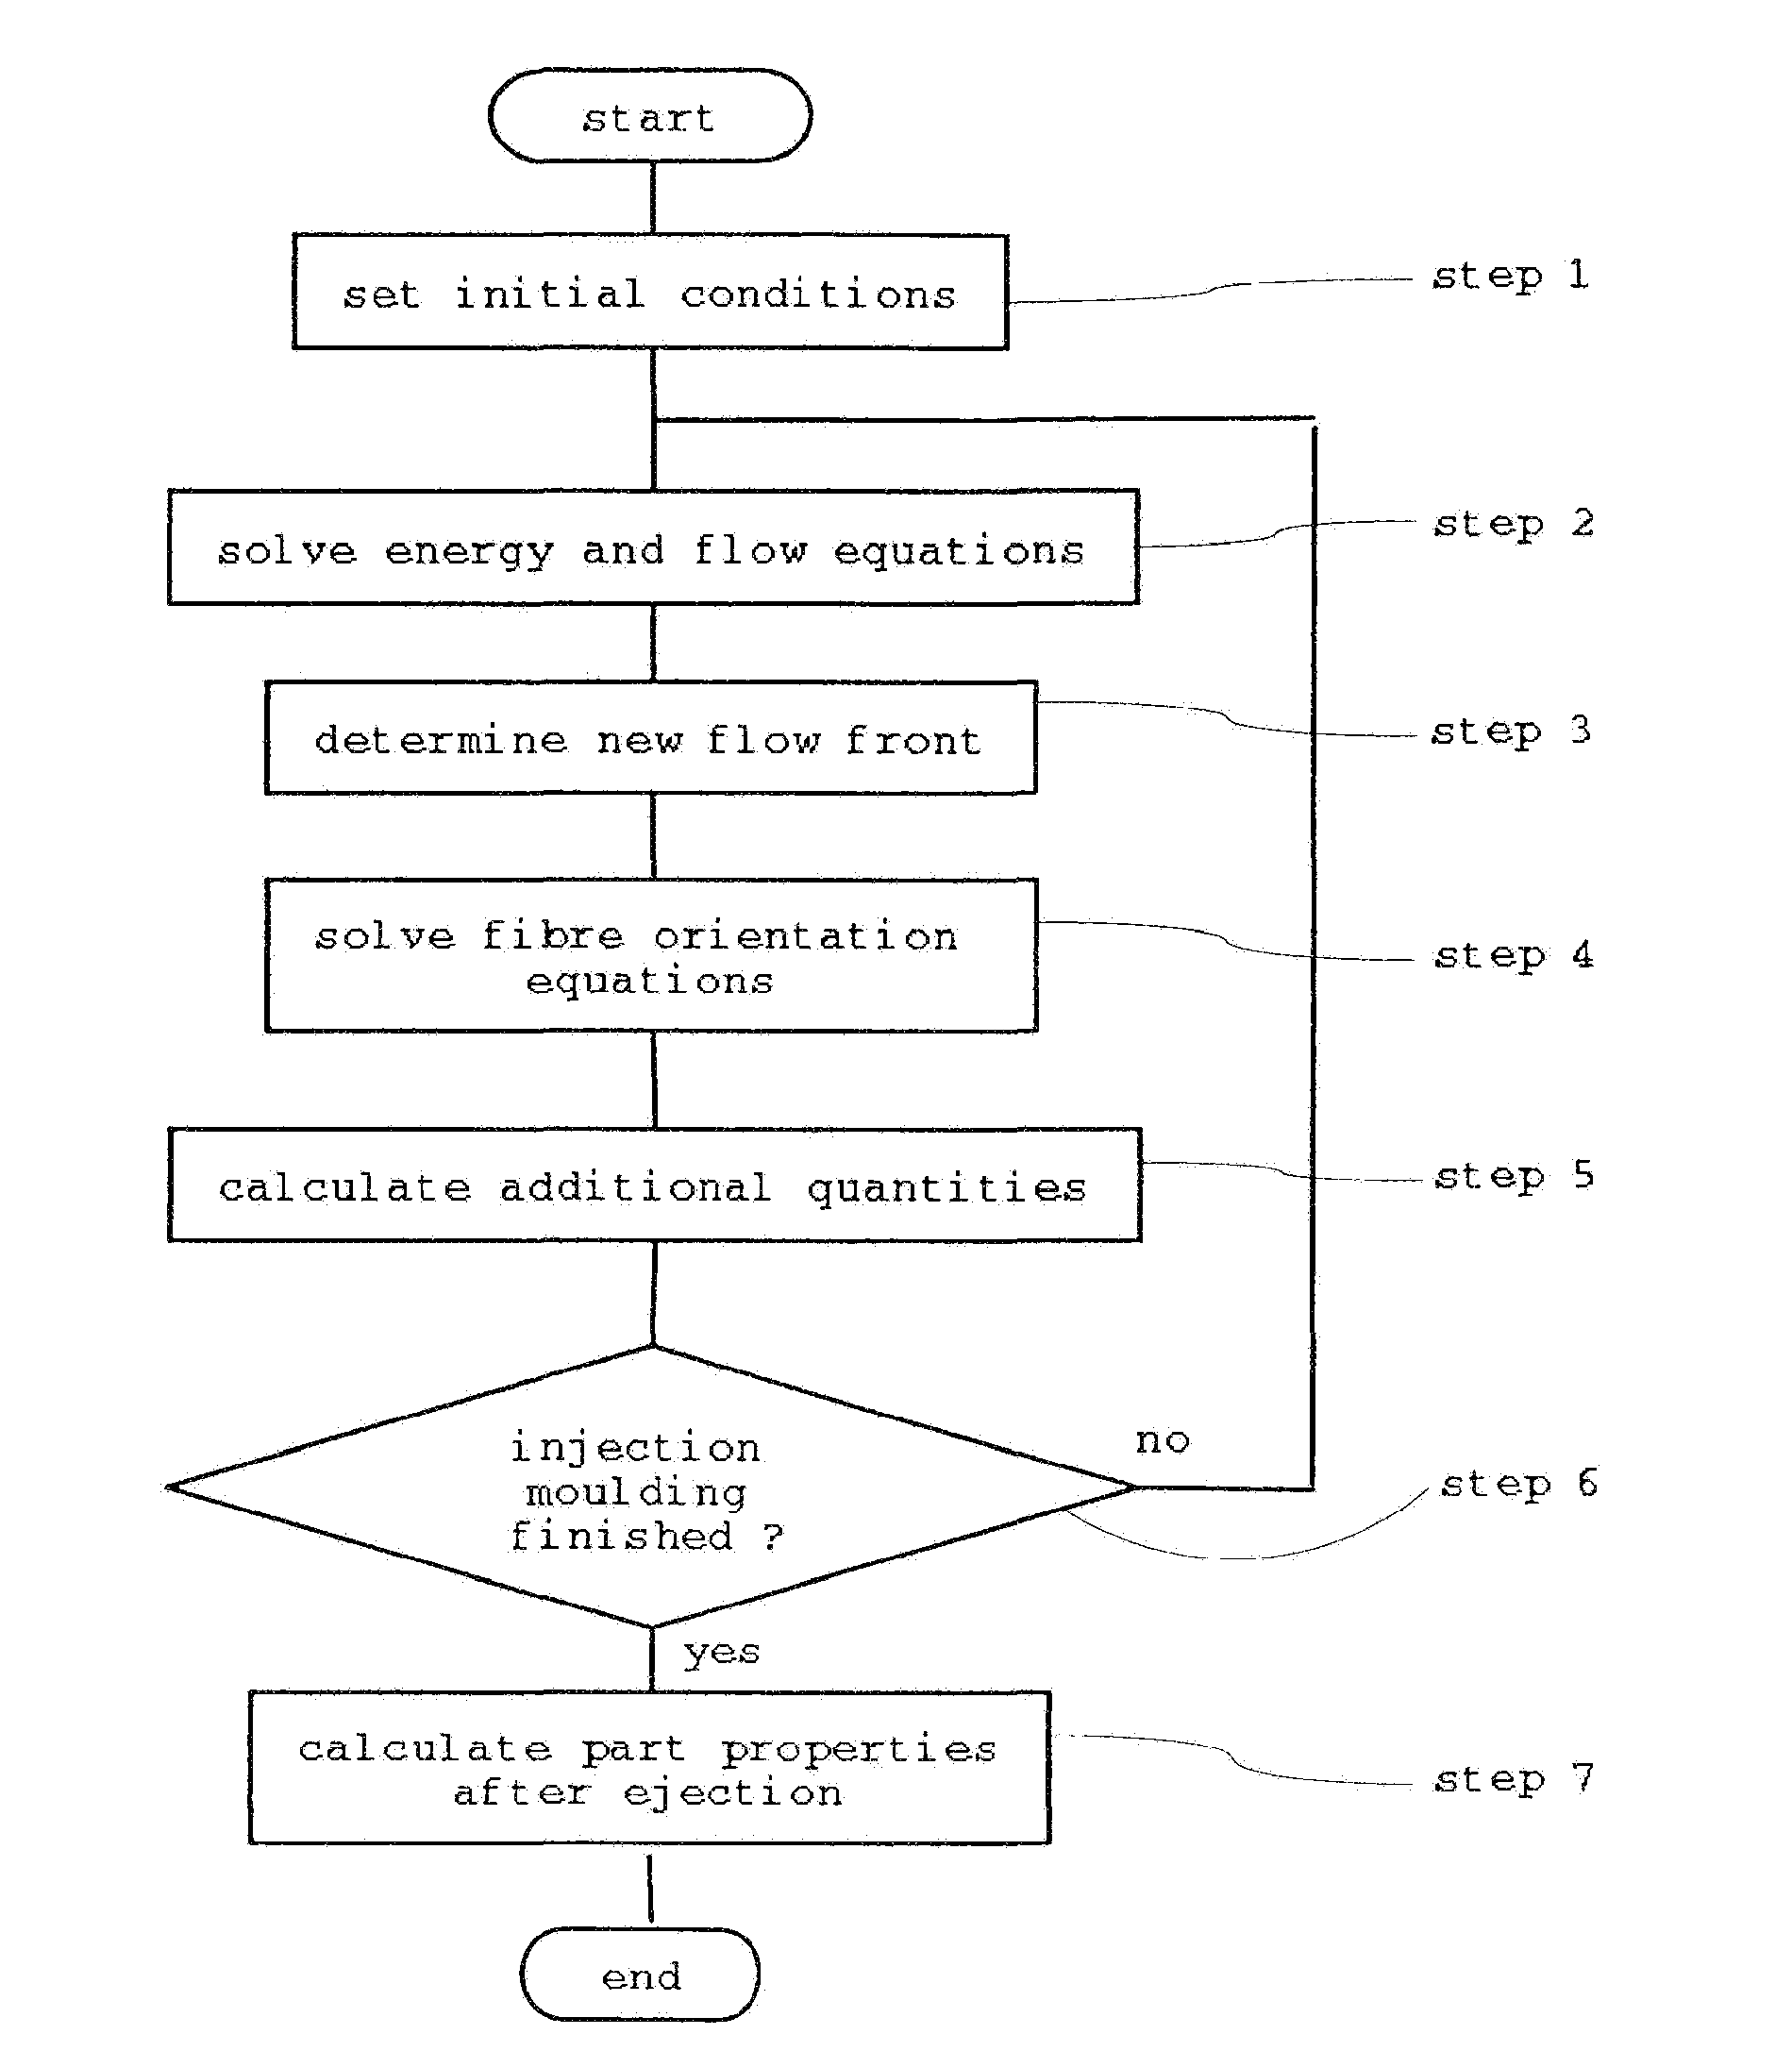 Method and Apparatus for Describing the Statistical Orientation Distribution of Particles in a Simulation of a Mould Filling Process